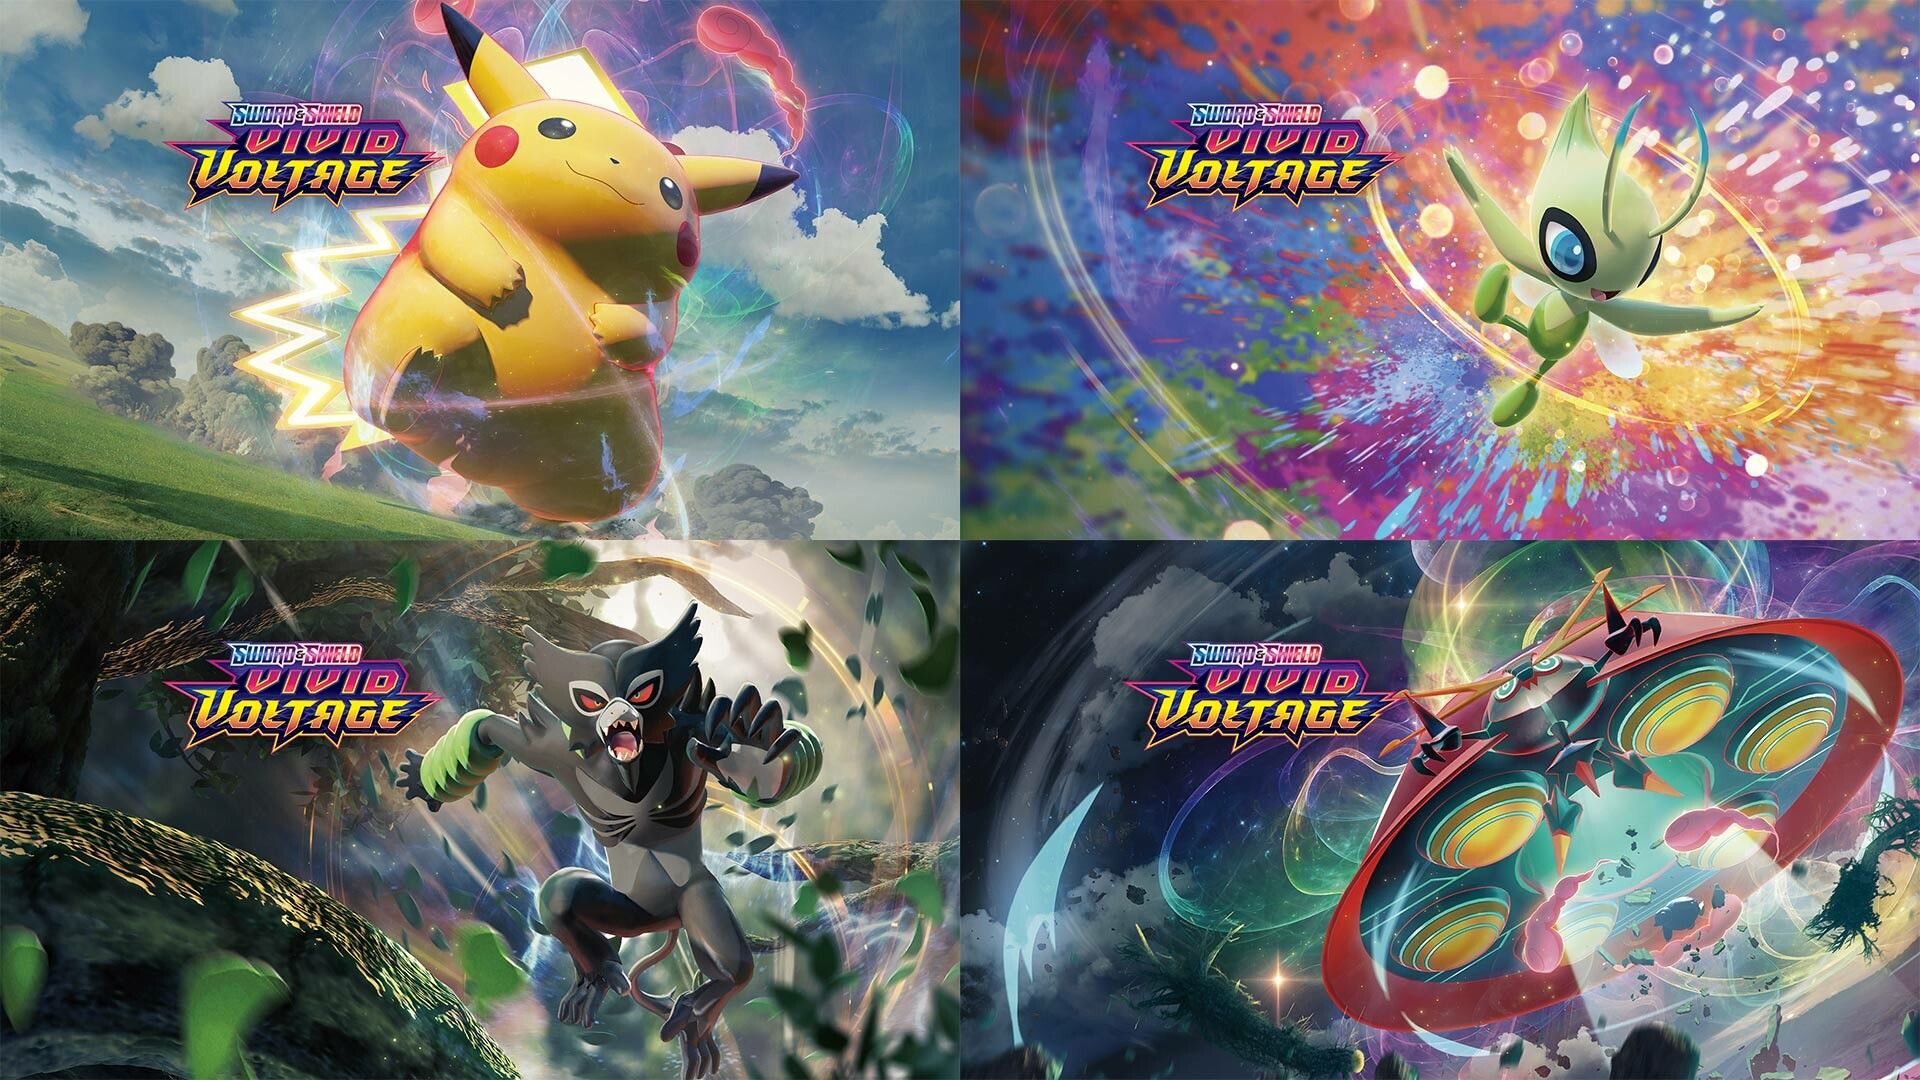 Download Vivid Voltage Wallpaper. PokeGuardian. We Bring You the Latest Pokémon TCG News Every Day!